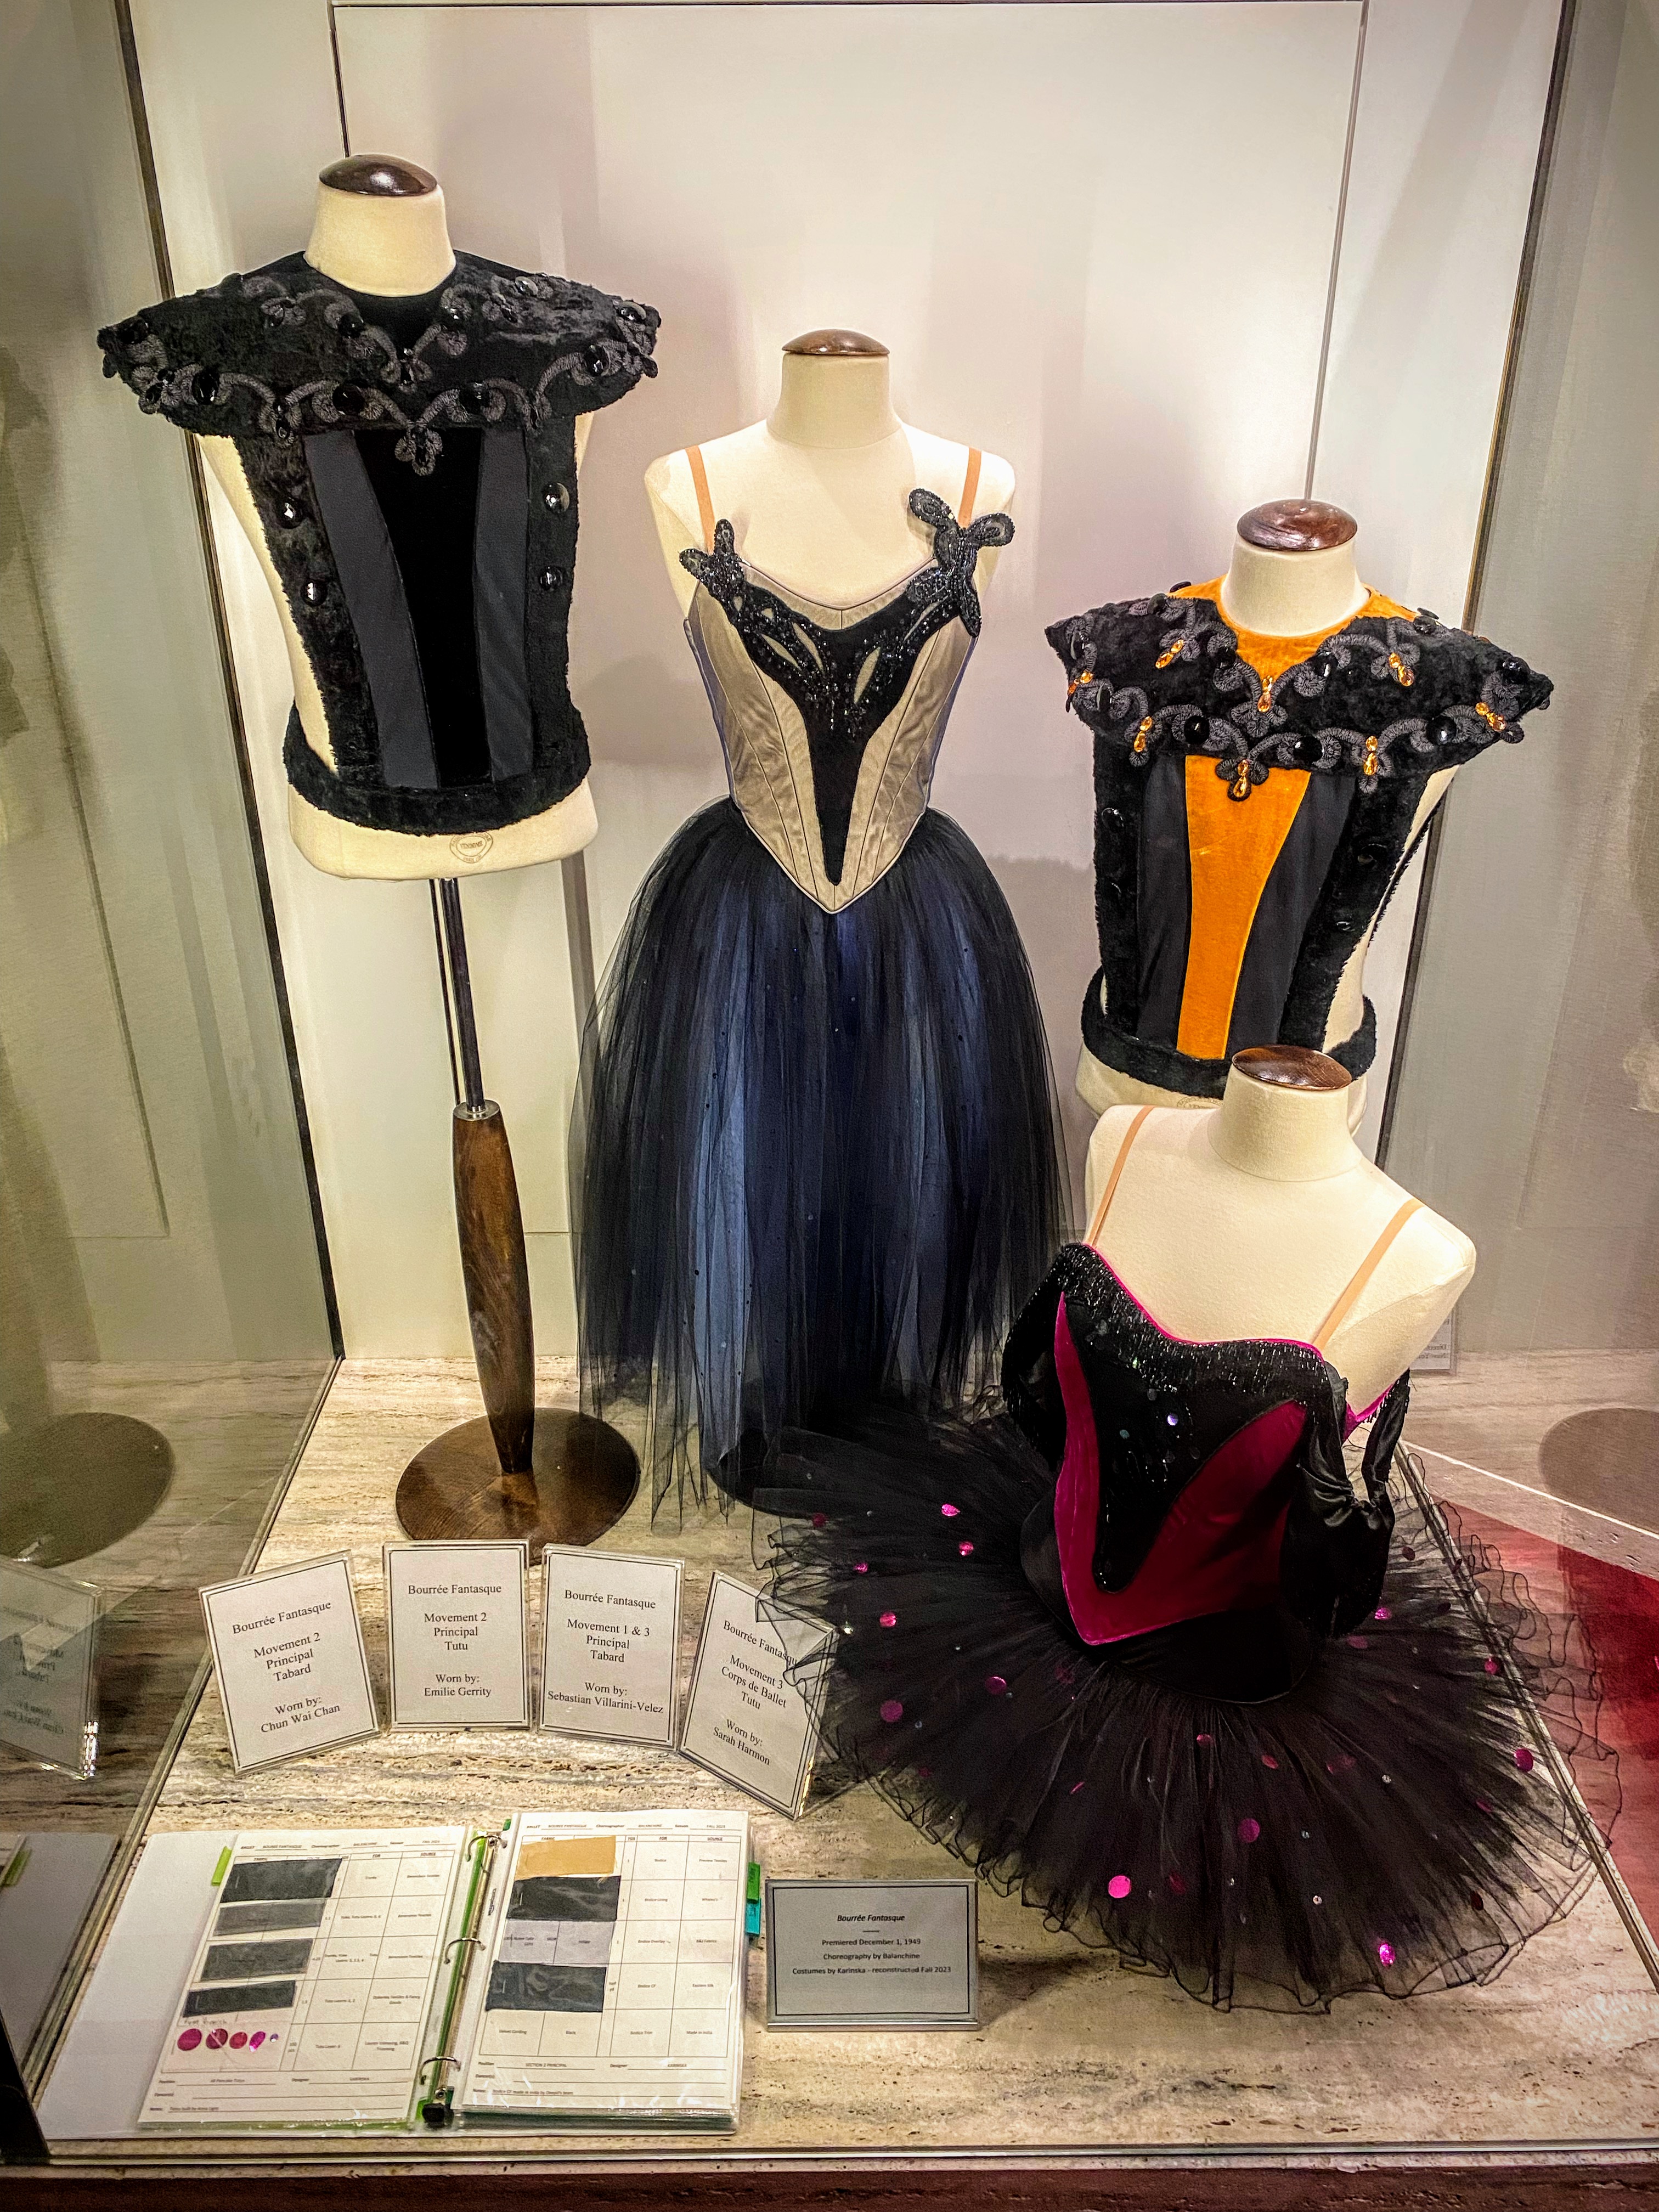 ballet bodices and tutus with a book of color swatches on display in the lobby of the Koch Theater. The colors for mens bodices are black and black and orange with intricate lace designs at the top. The tutus one romantic with a long skirt and one more classic with a short full skirt are in shades of cream and blue, and red and black respectively